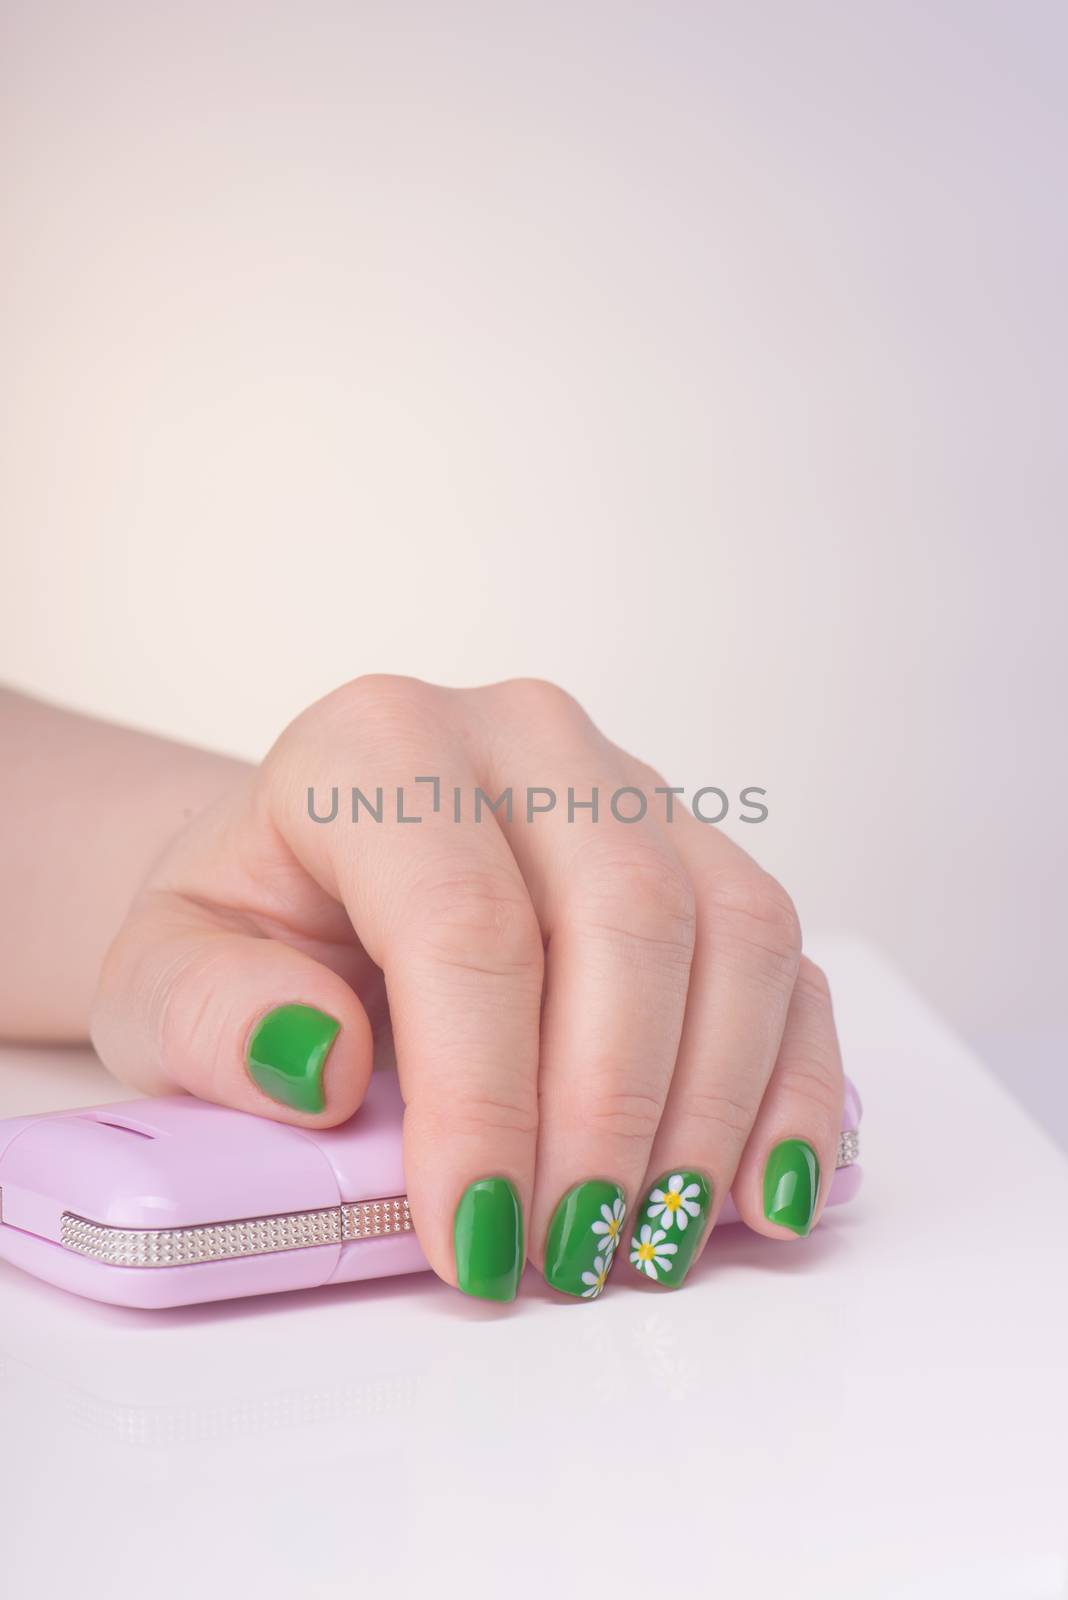 Female left hand with green manicure on a white table